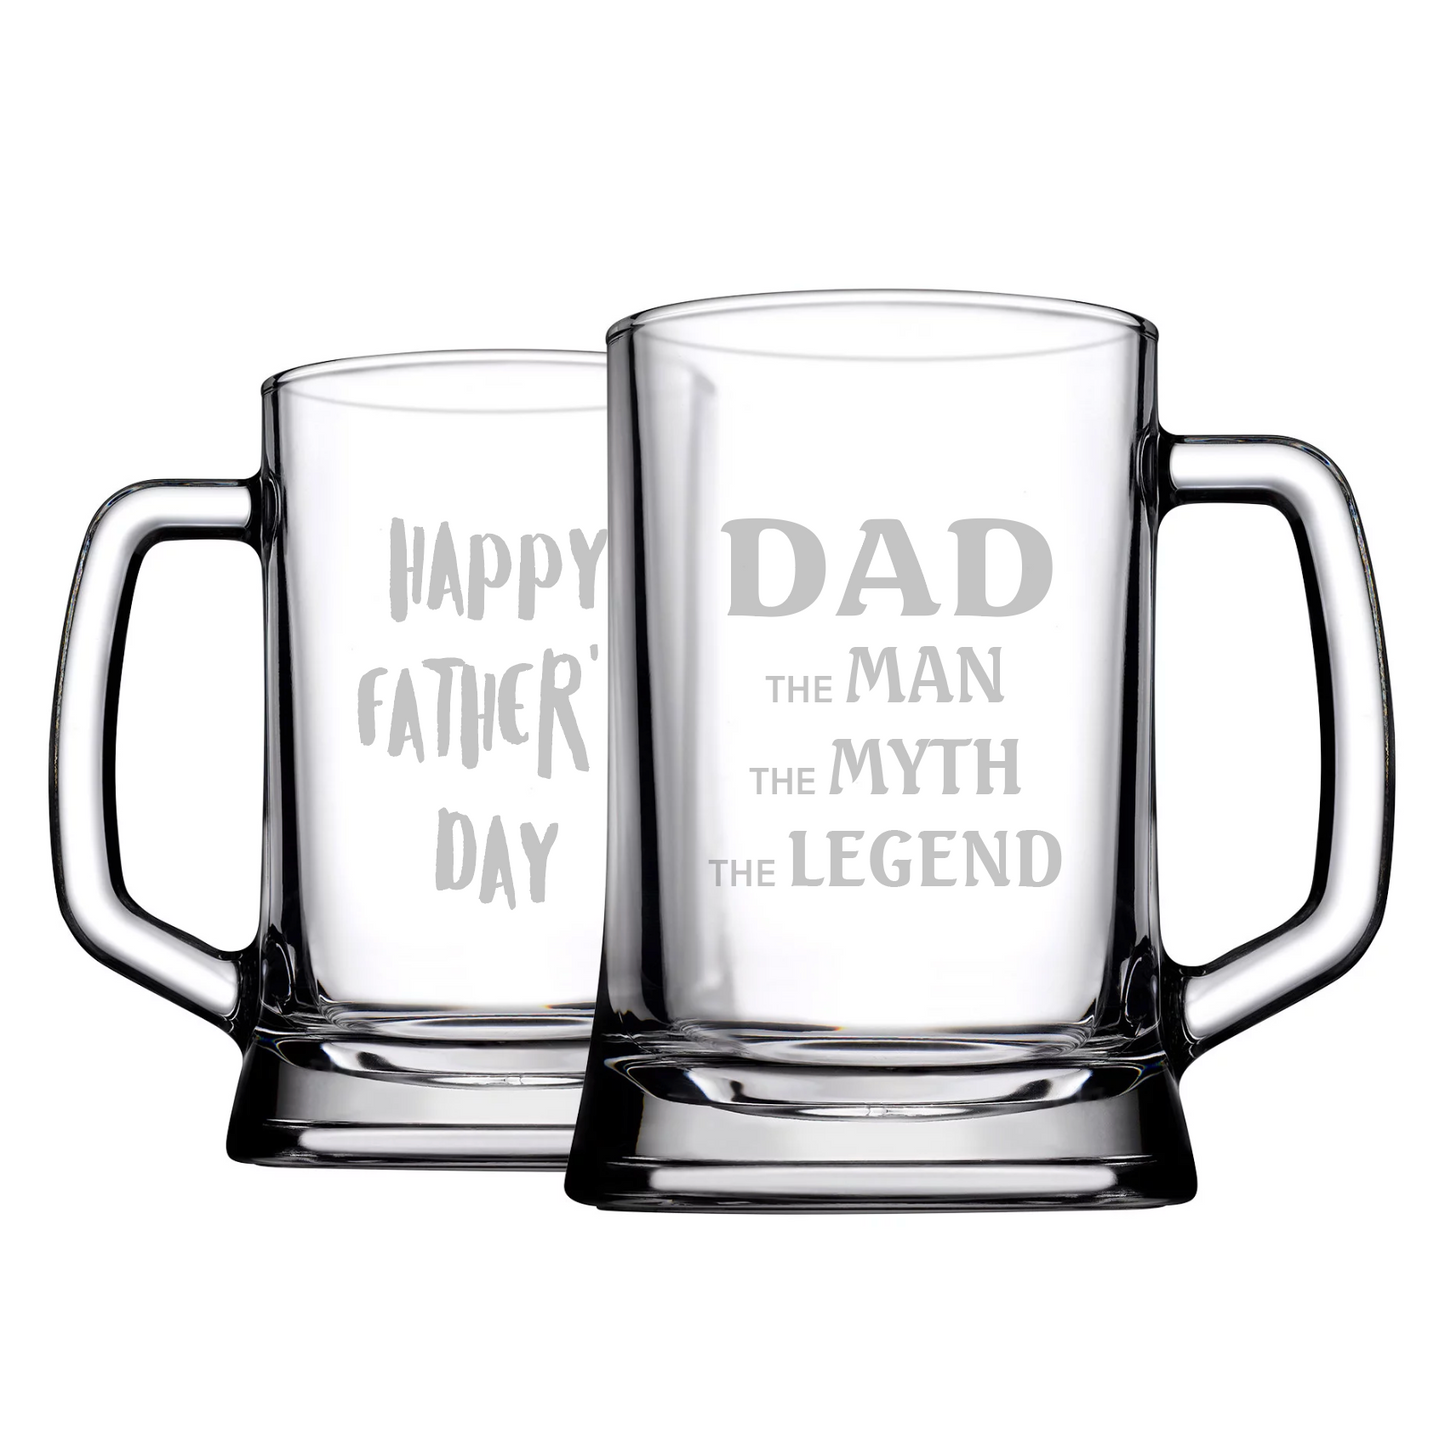 Dad the man the myth etched beer mug fathers day